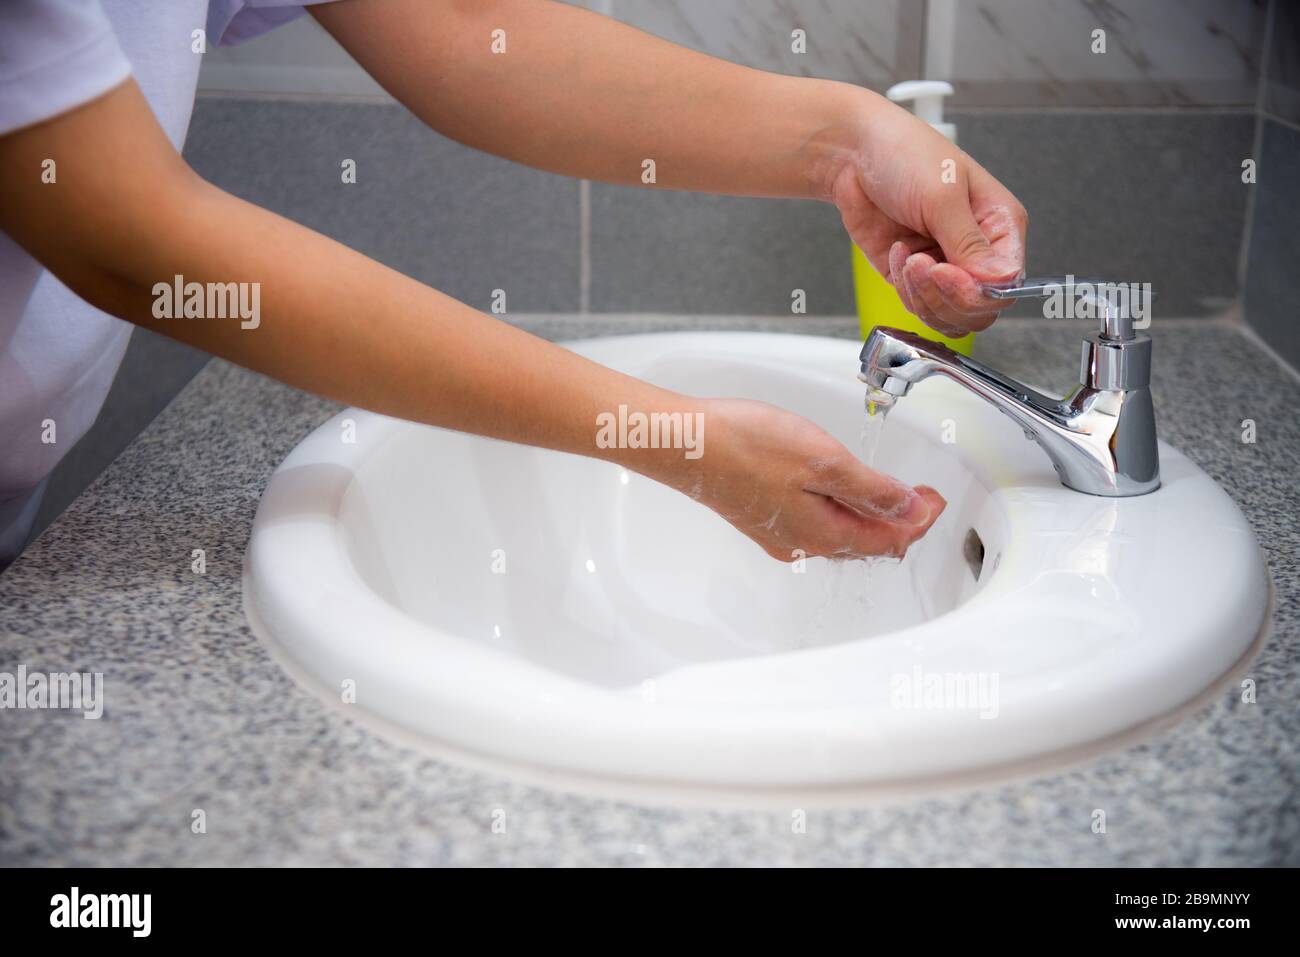 Woman wash hand cleaning with soap in the sink, Disinfection to stop the coronavirus or prevent the spread of the Covid 19 outbreak, Good hygiene prot Stock Photo